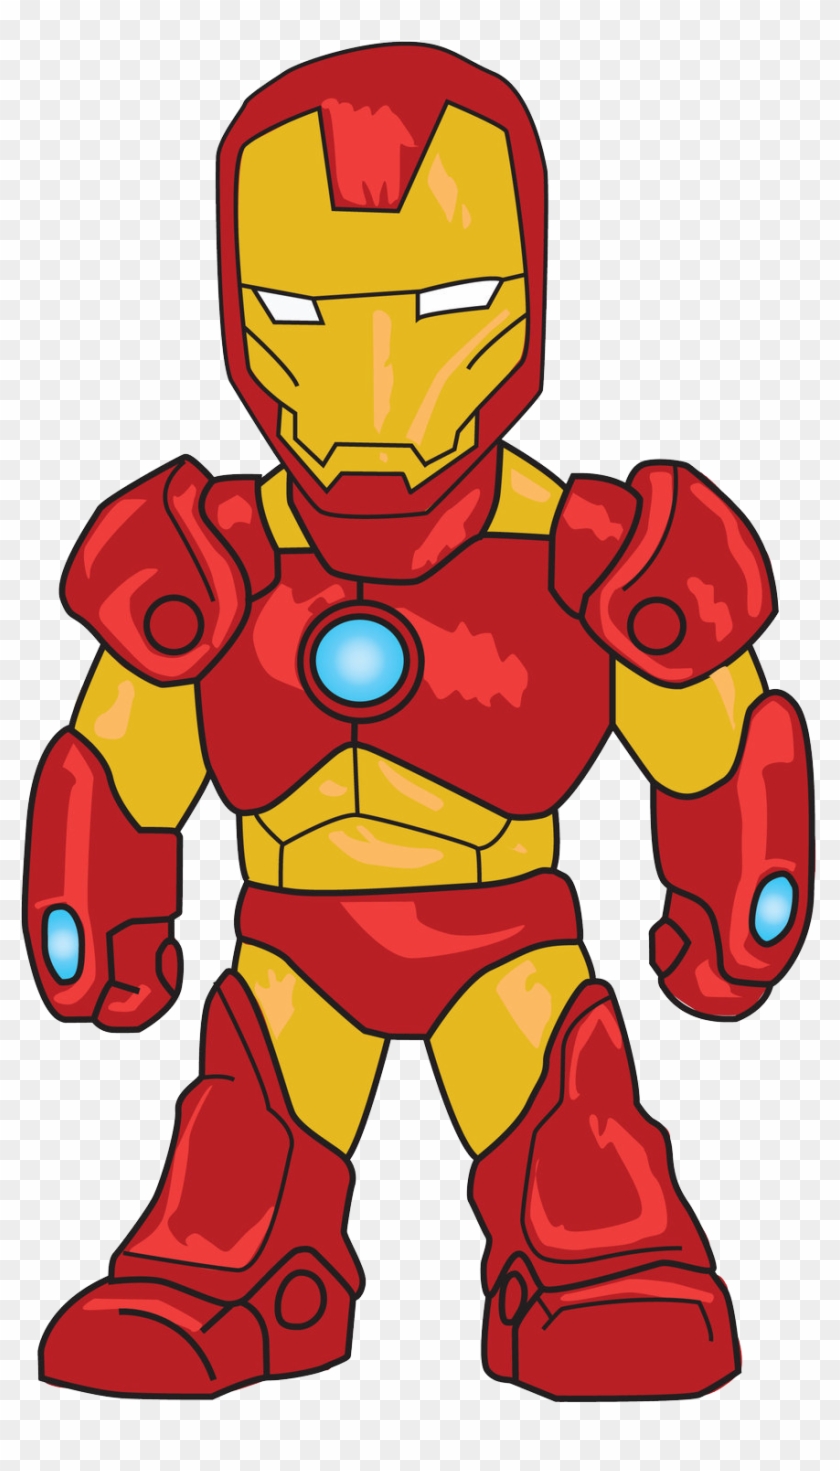 How to Draw Ironman | Step-by-Step Tutorial - YouTube